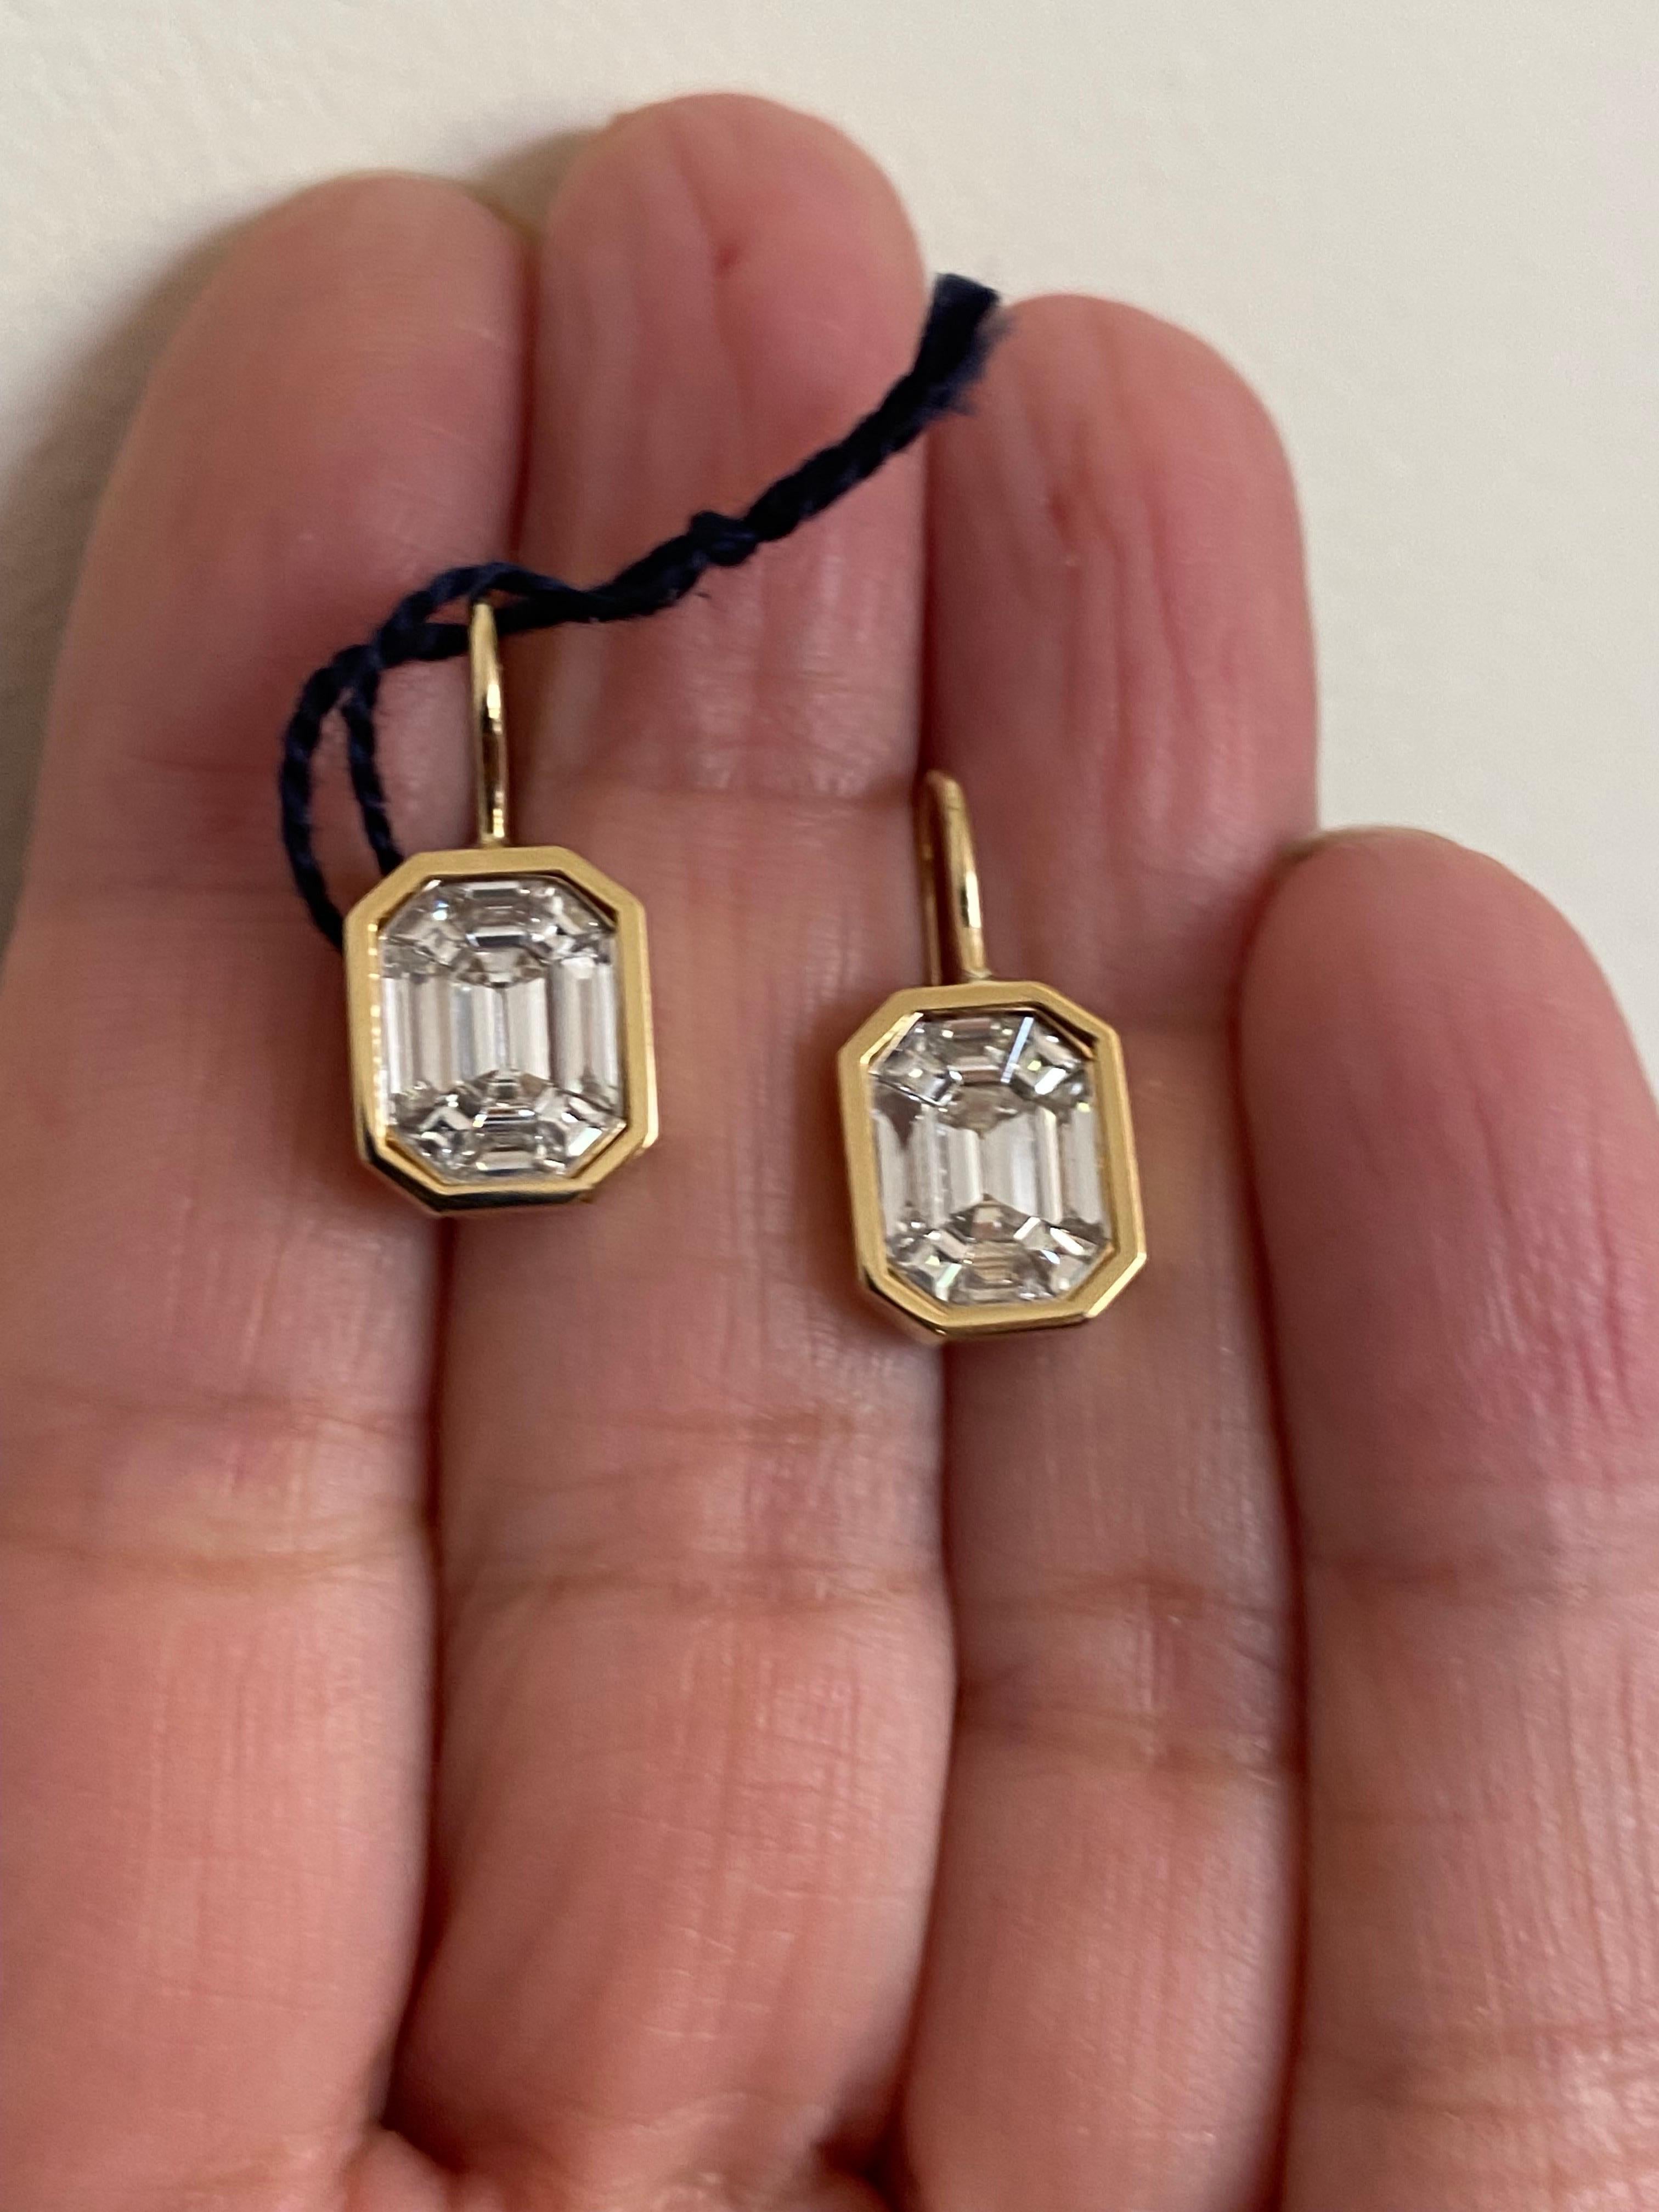 Hanging emerald cut illusion earrings on bezel set in 18K yellow gold. The earrings are a composite of baguette and trapezoid diamonds to create the illusion of a single emerald cut stone. The color of the stones are F and the carat weight is VS1.